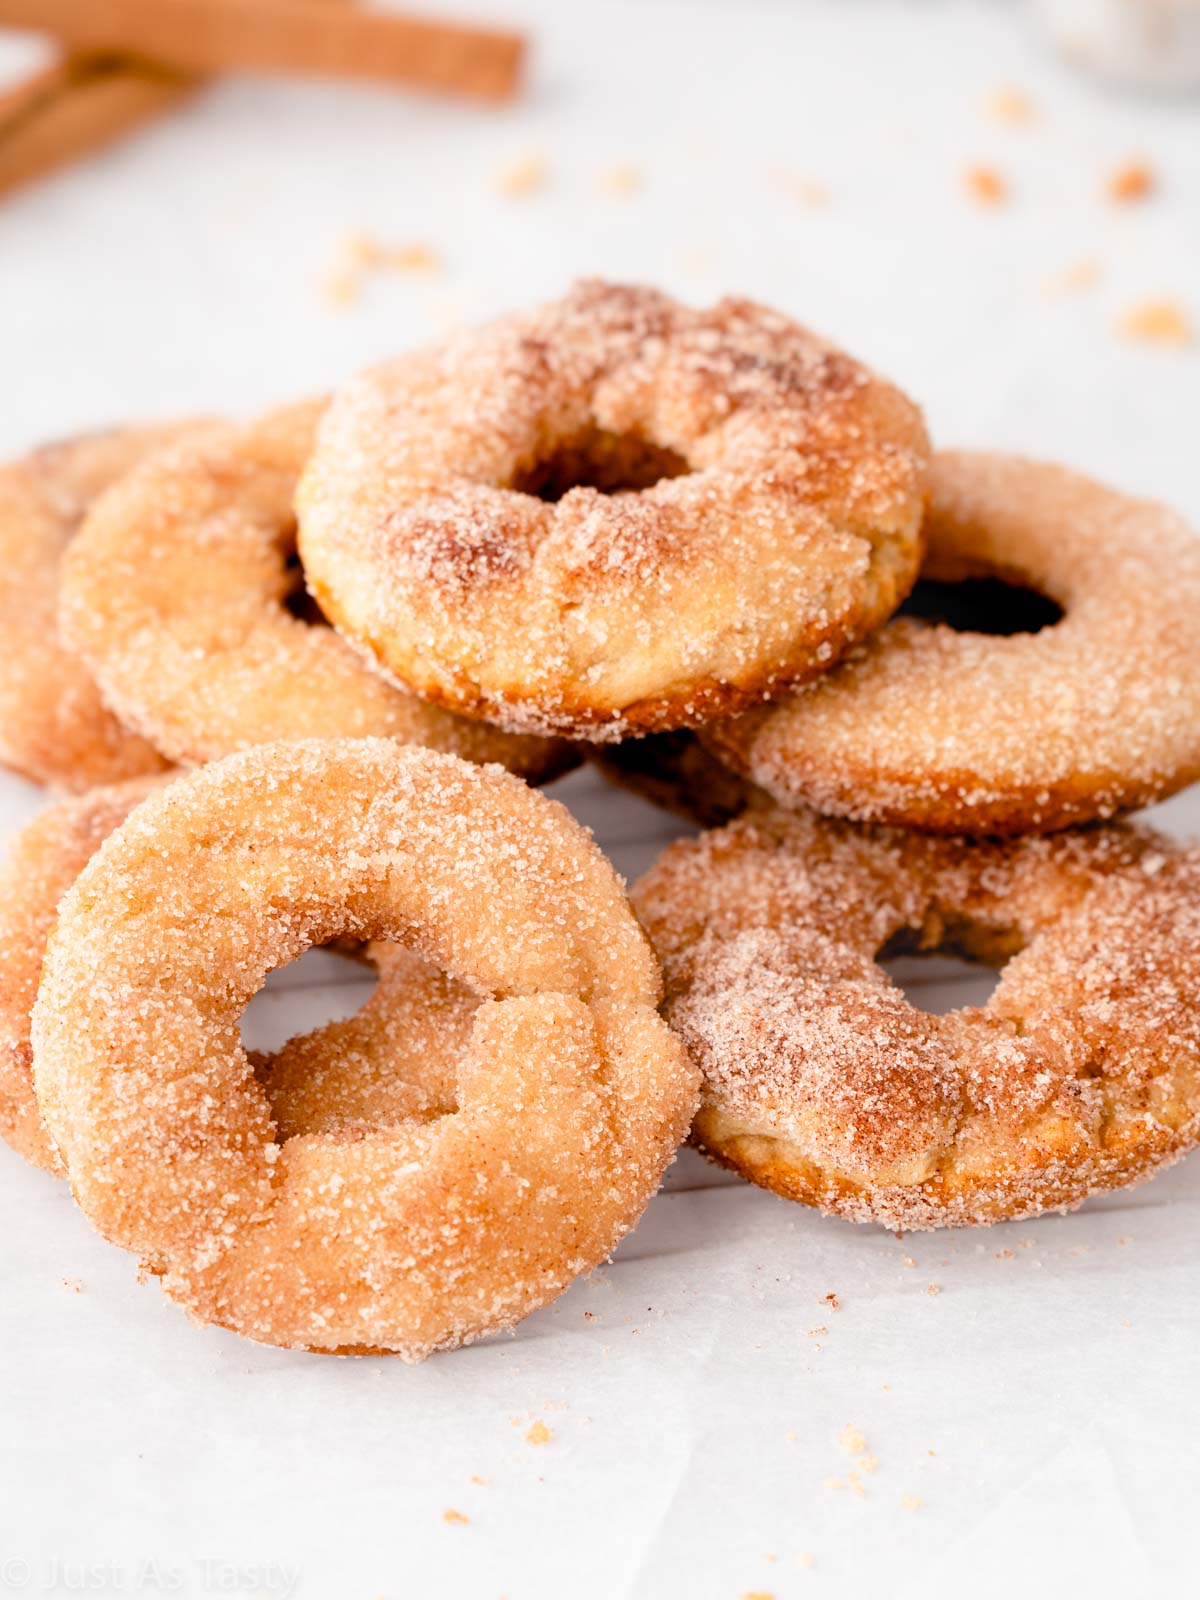 Stack of gluten free apple cider donuts topped with cinnamon sugar.